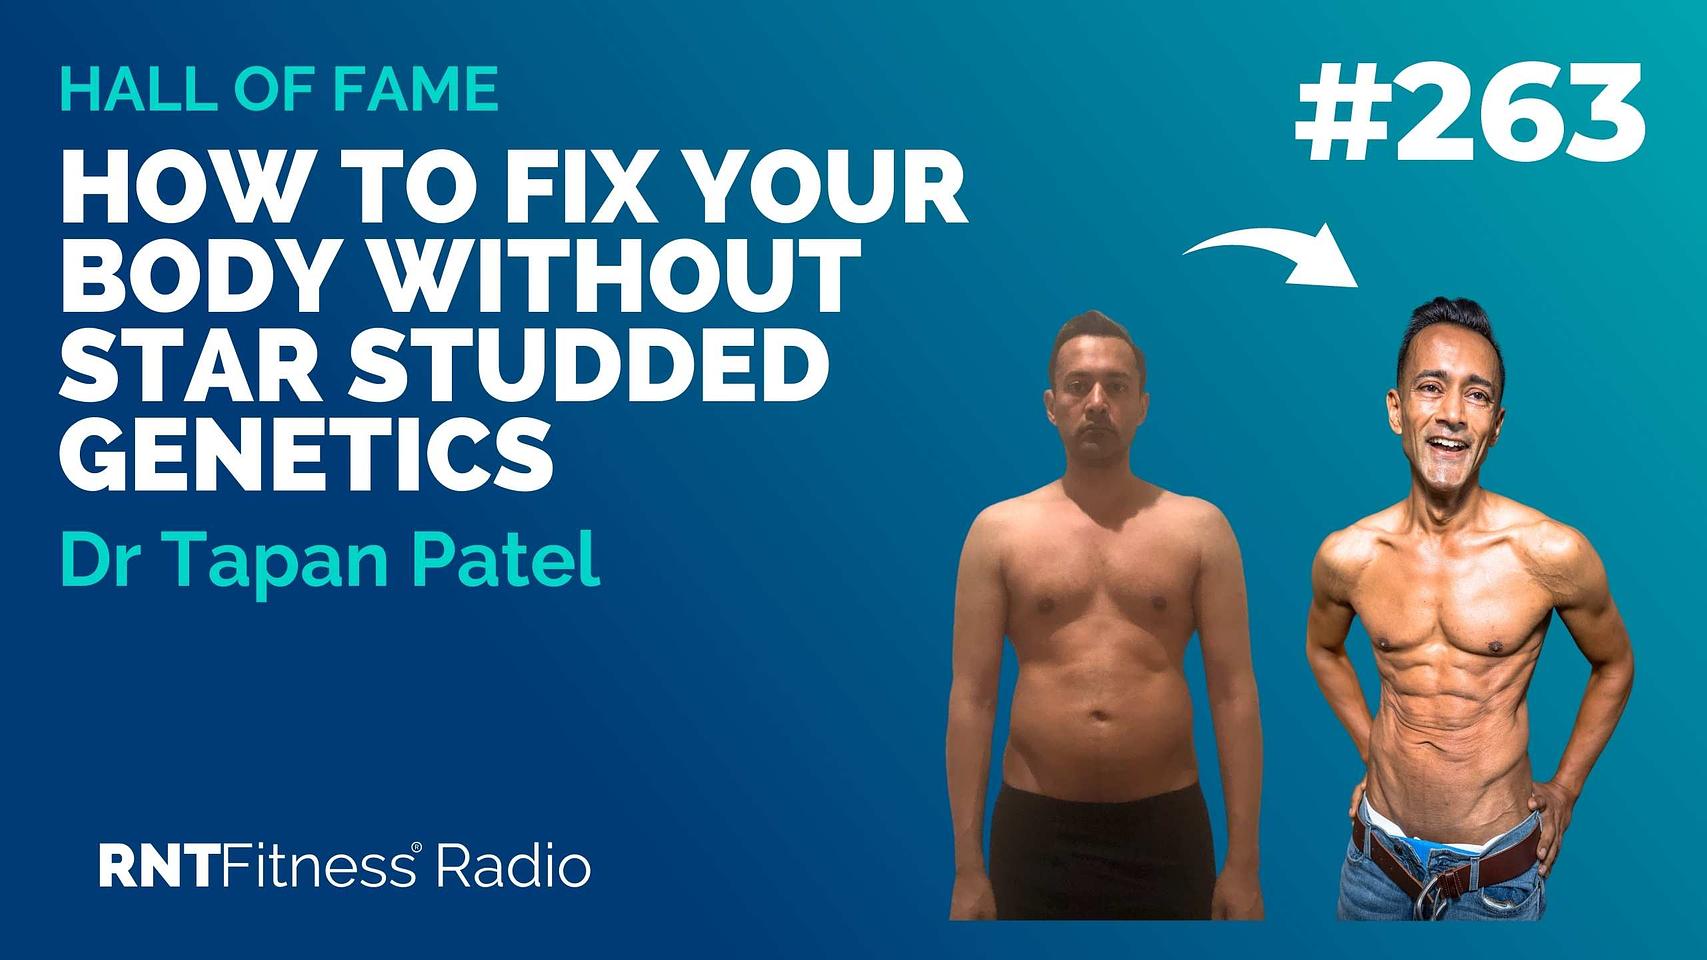 Ep. 263 Hall Of Fame | Dr Tapan Patel: How To Fix Your Body Without Star Studded Genetics